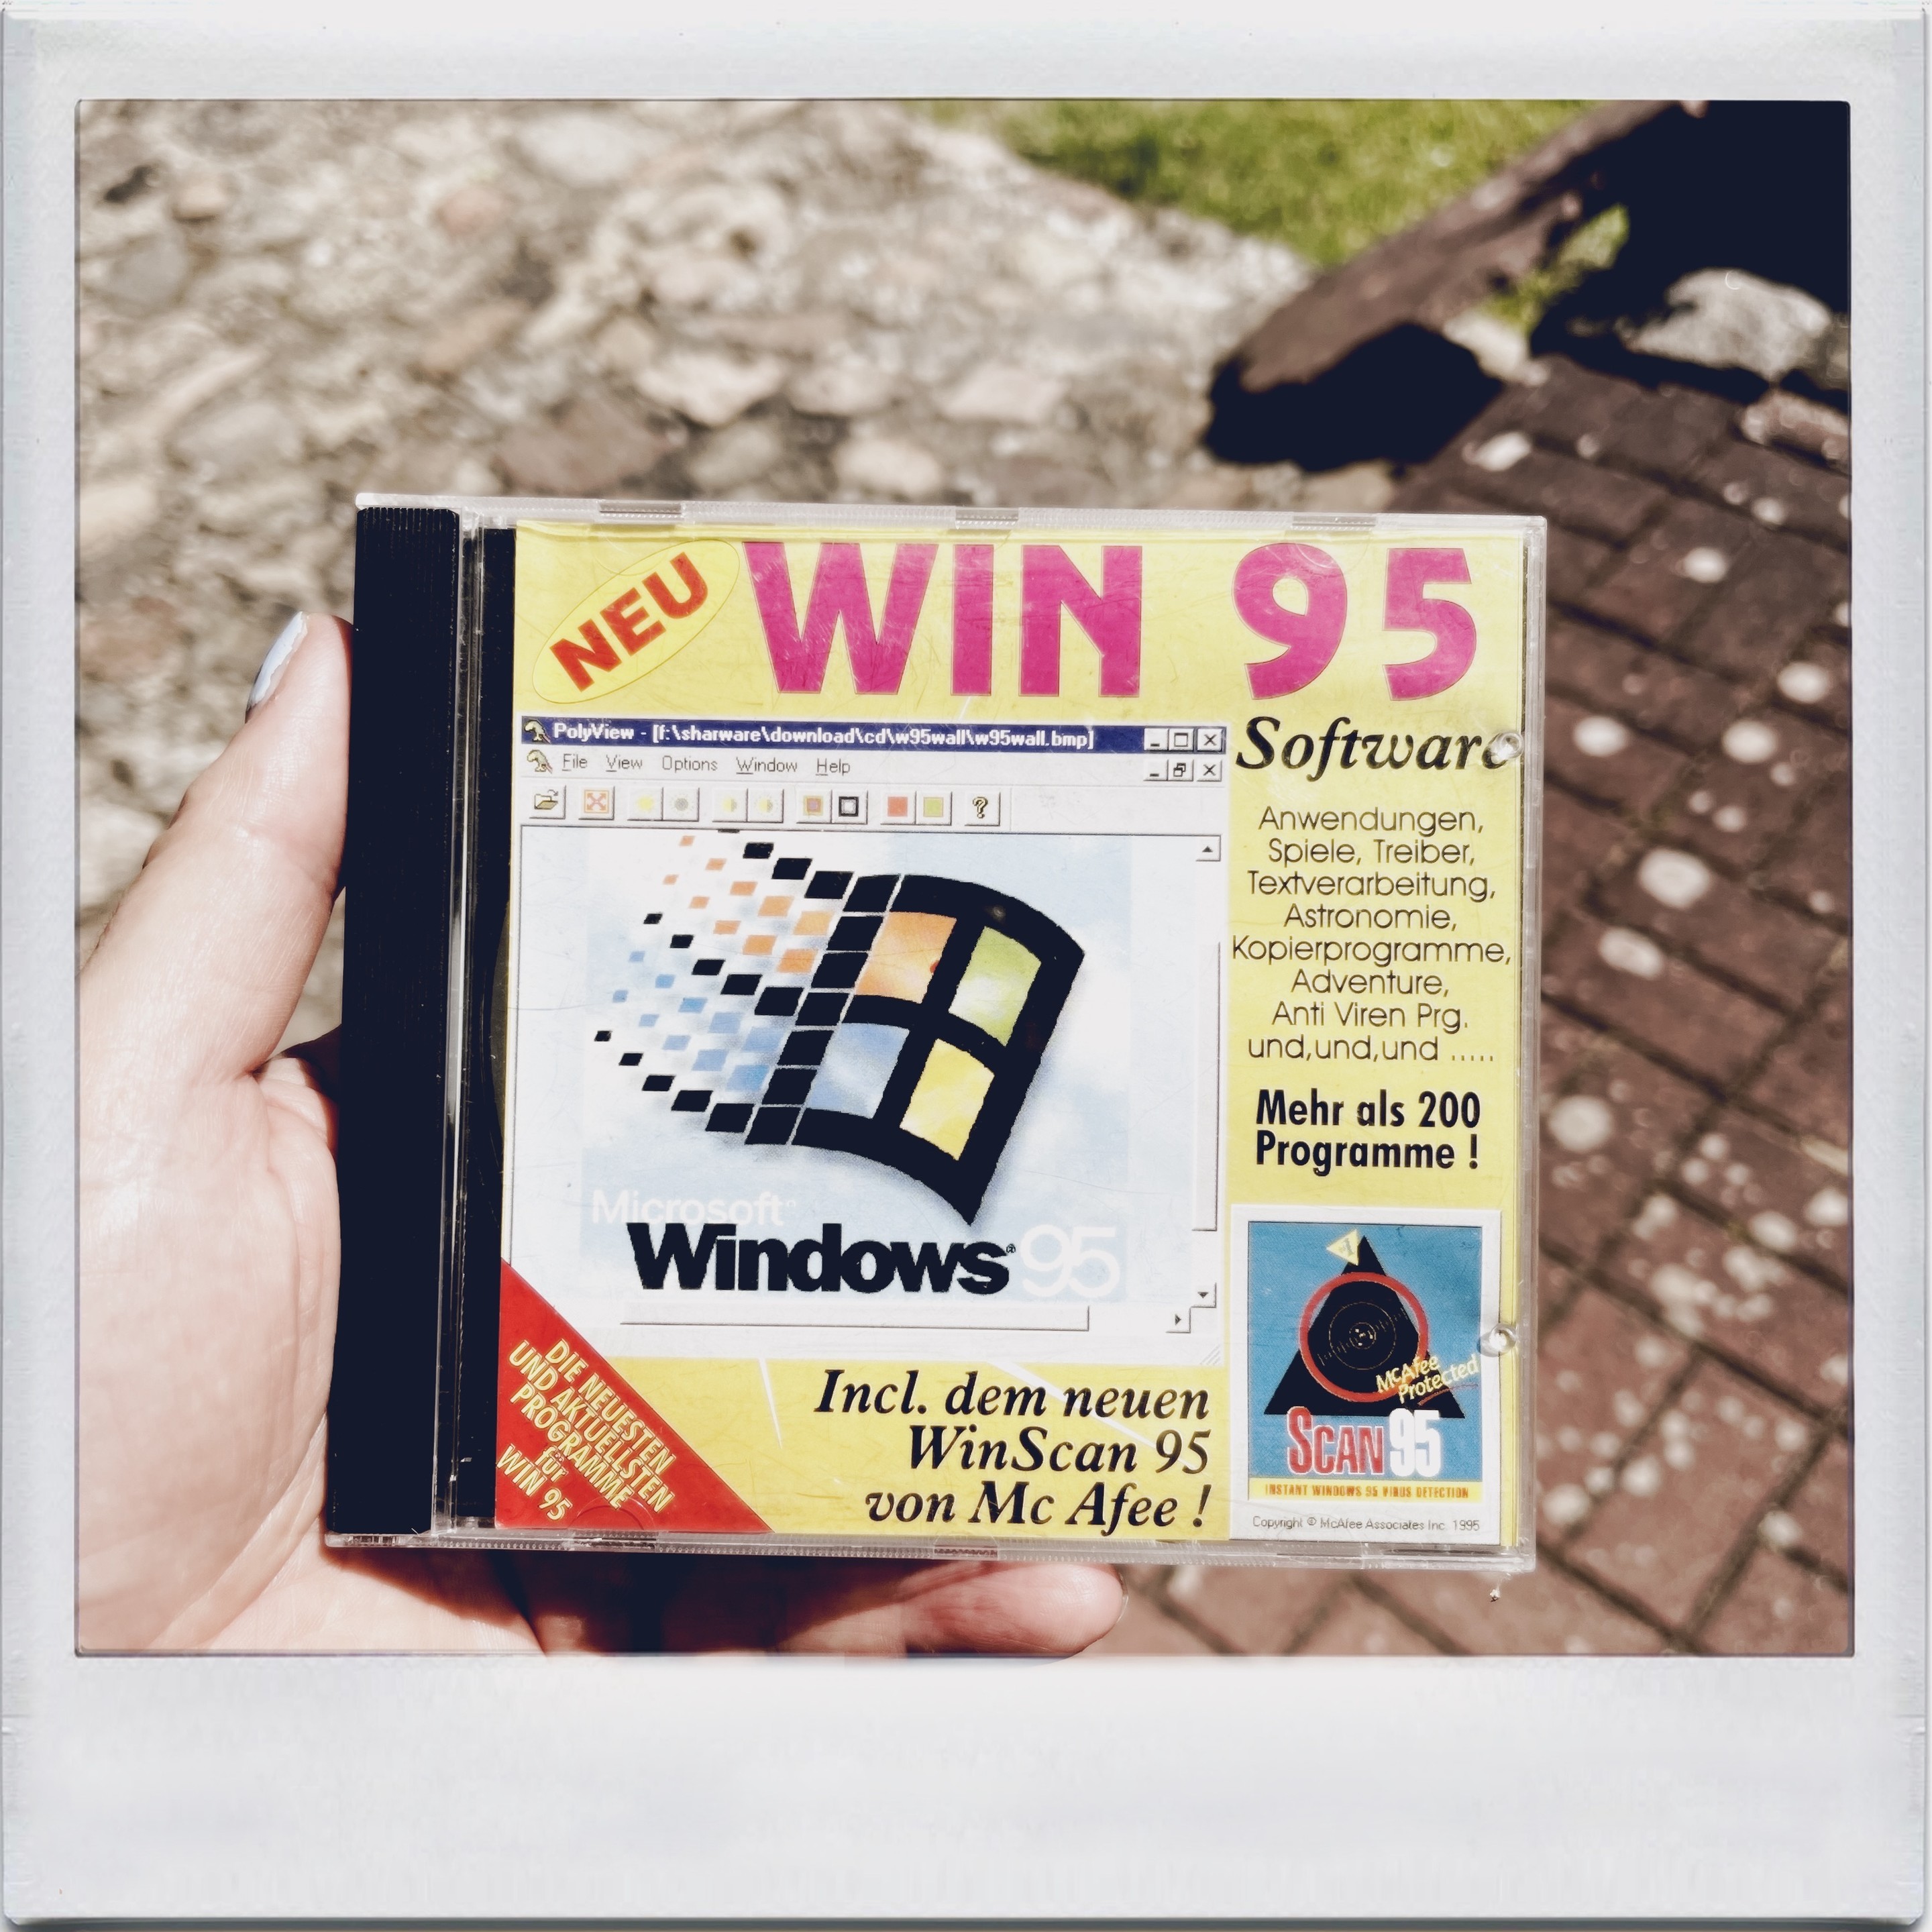 A hand holding a Windows 95 software CD package with German text, showing the Windows logo and advertising more than 200 programs, including WinScan 95 by McAfee. The background includes a stone path and grass.